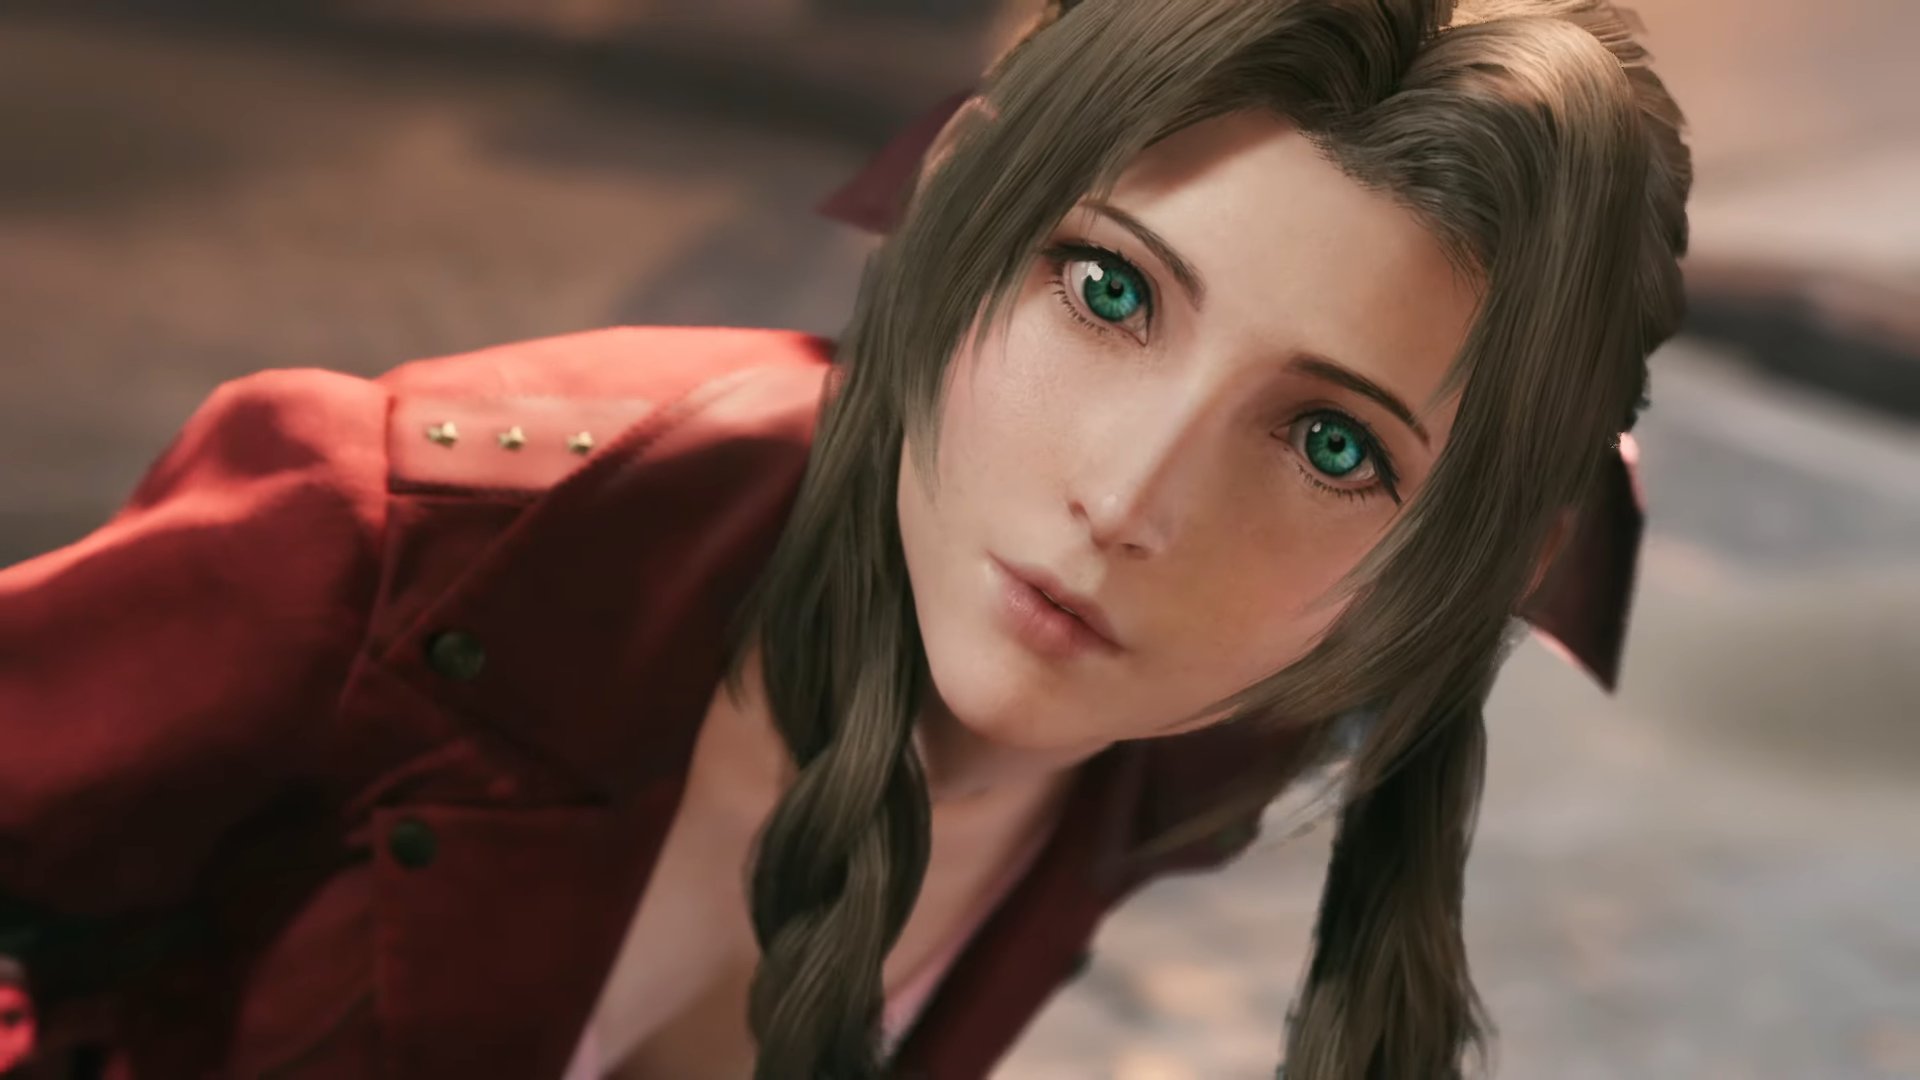 Aerith From The Final Fantasy VII Remake Gains Minor Controversy - SideArc